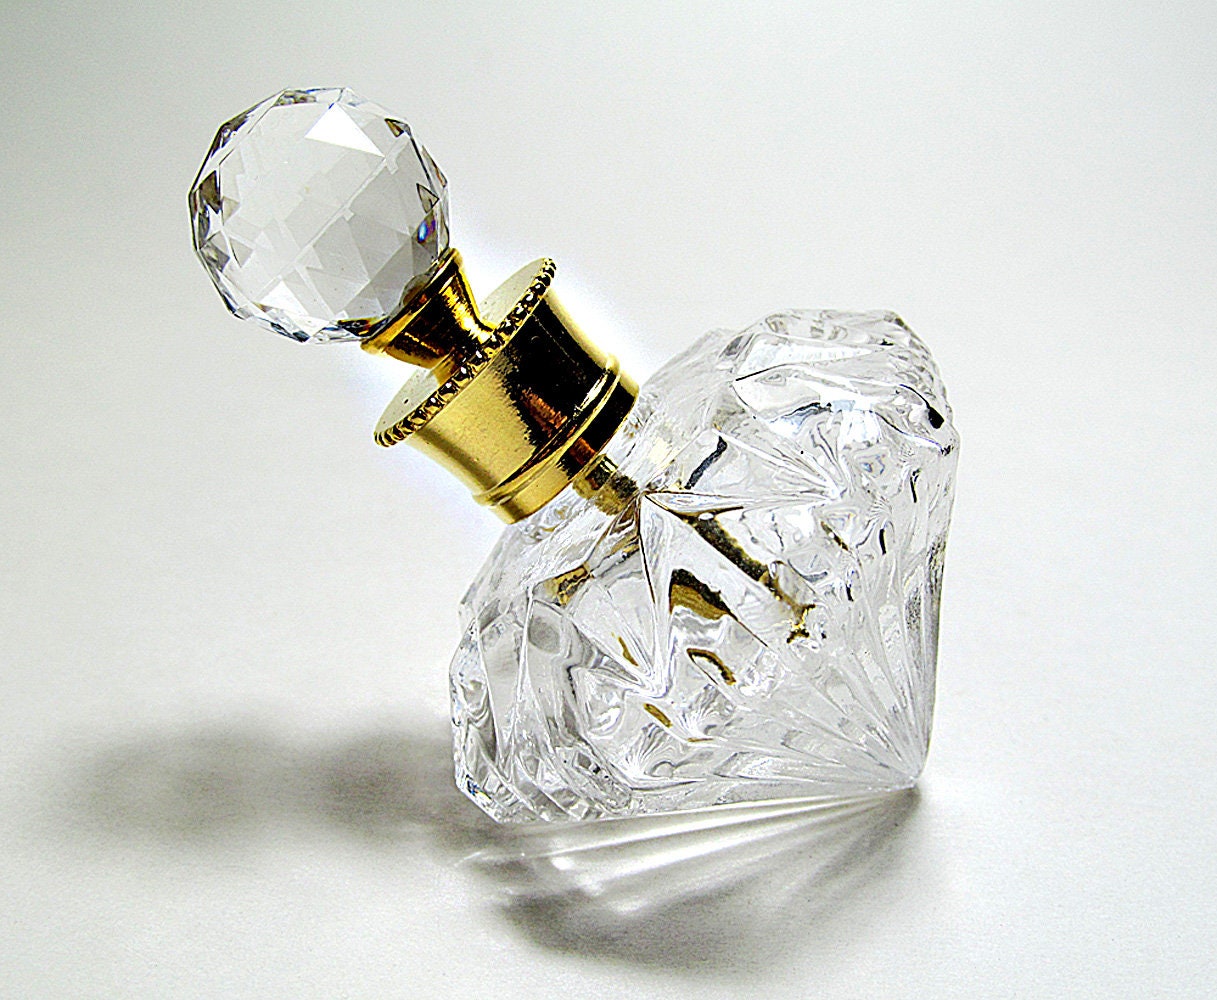 Arabian Perfume Bottles for home decor and adorning your sacred space